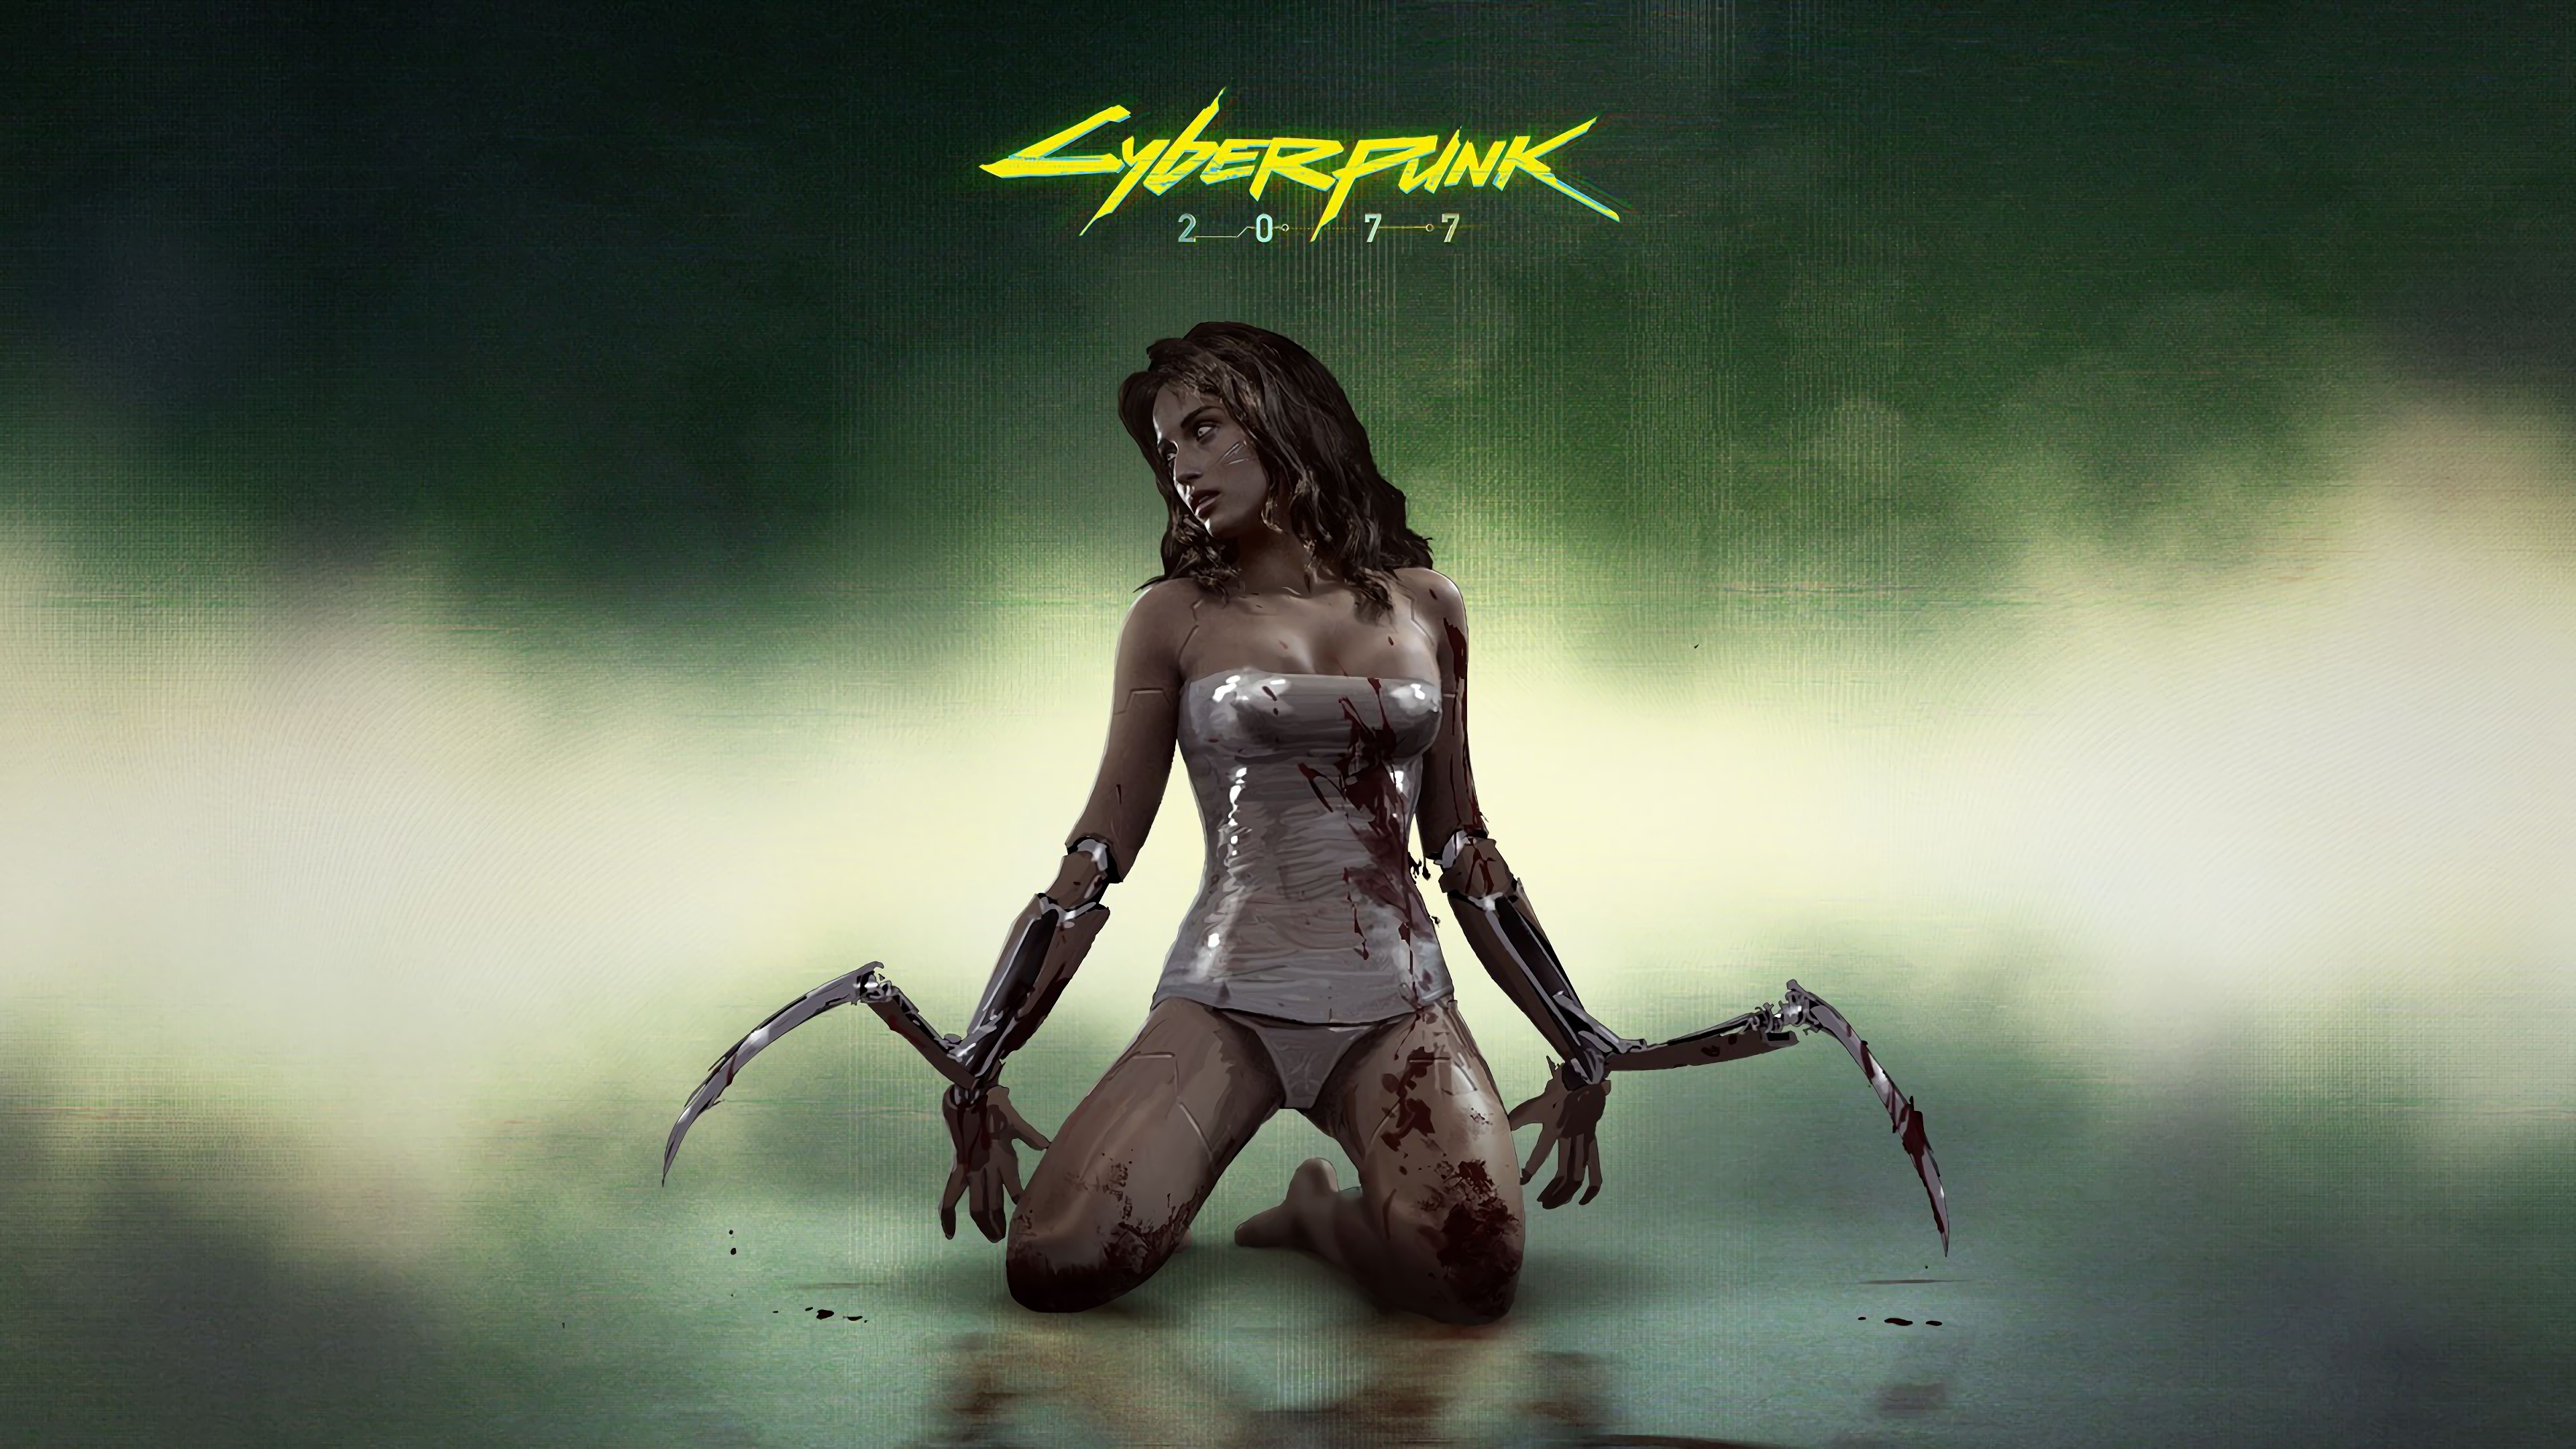 Cyberpunk 2077 Official Poster HD Games Wallpapers, HD Wallpapers